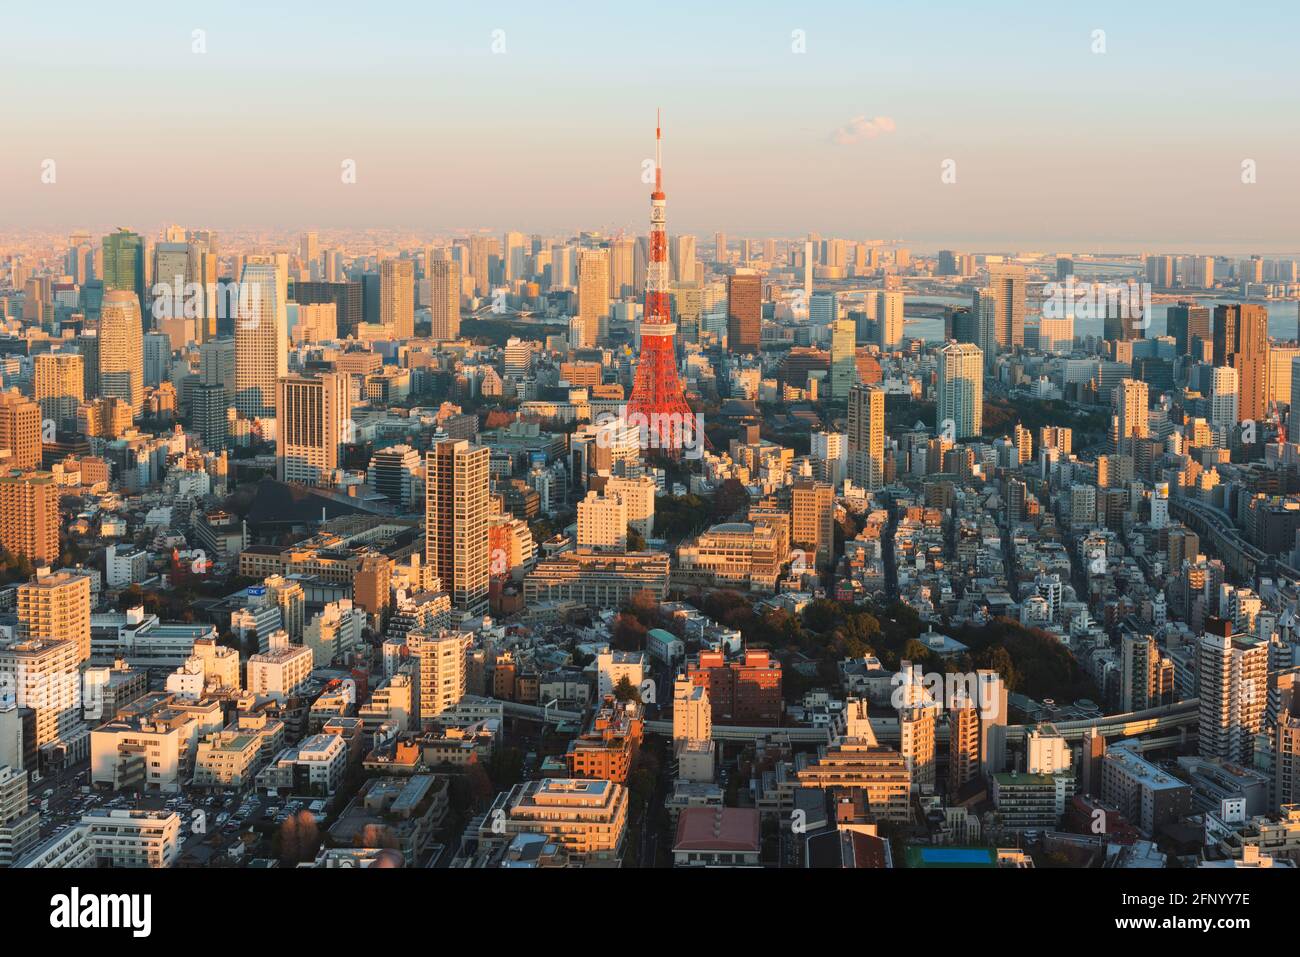 Tokyo, Japan - January 14, 2016: Sunset view of Tokyo Skylines with the Tokyo Tower. Tokyo is both the capital and largest city of Japan. Stock Photo